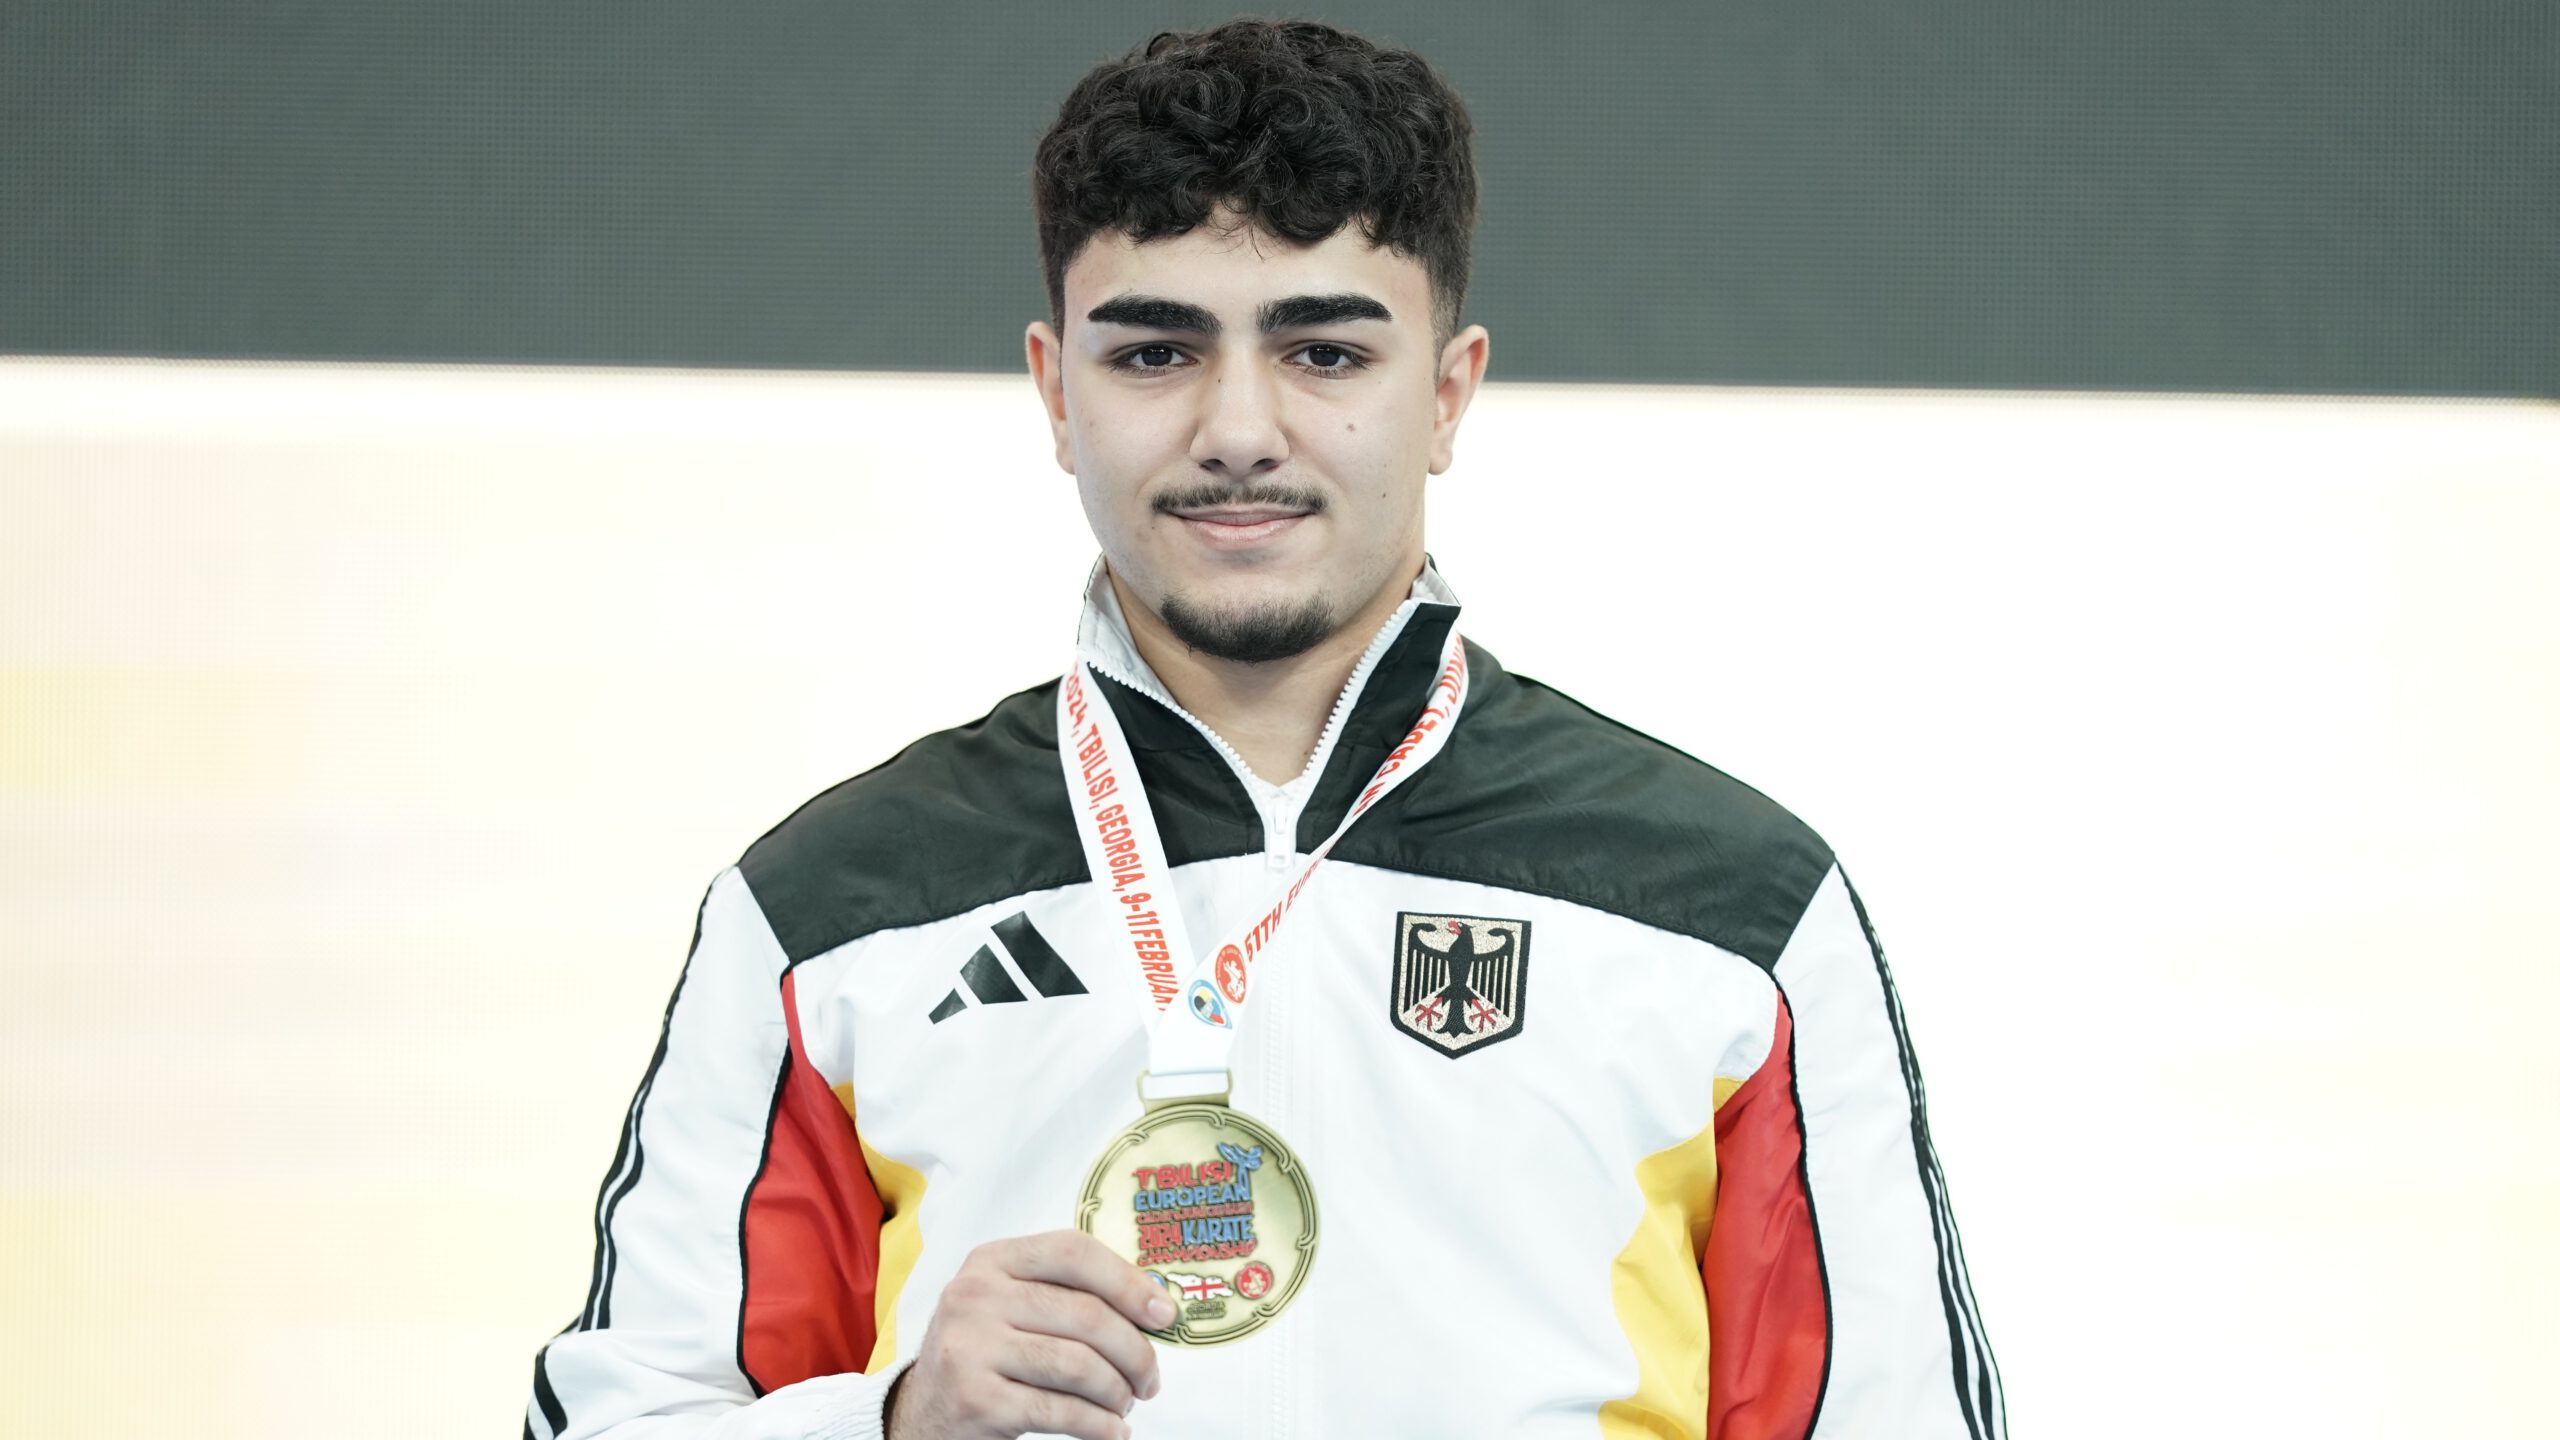 This photo taken during the European Cadet, Junior, U21 Karate Championships in New Sports Palace in Tbilisi, Georgia between 9-11 February 2024.

© All rights reserved - Gökhan Taner / Gokhan Taner Photography